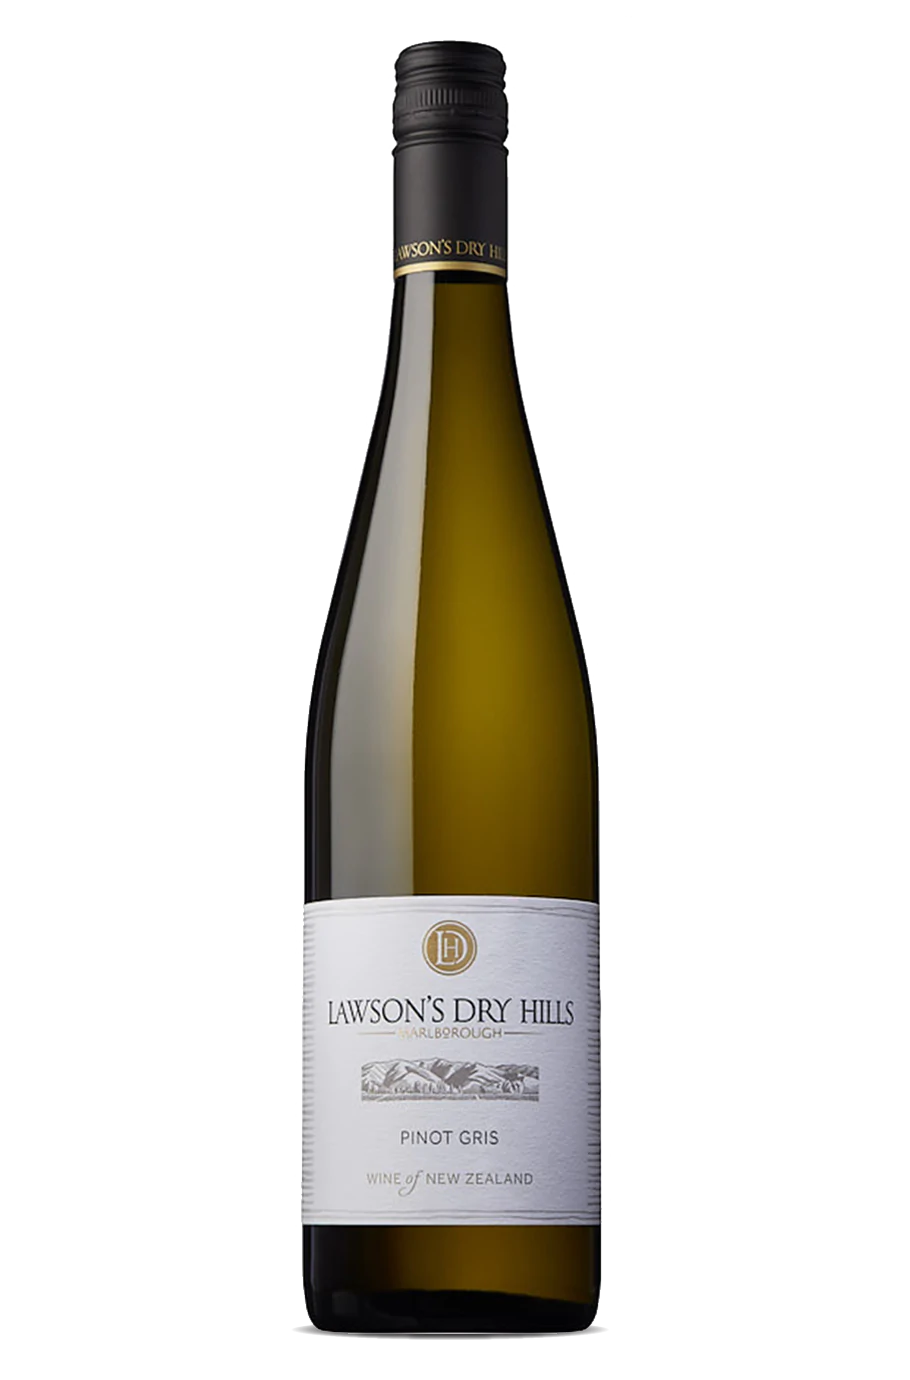 Lawson's Dry Hills Estate Pinot Gris